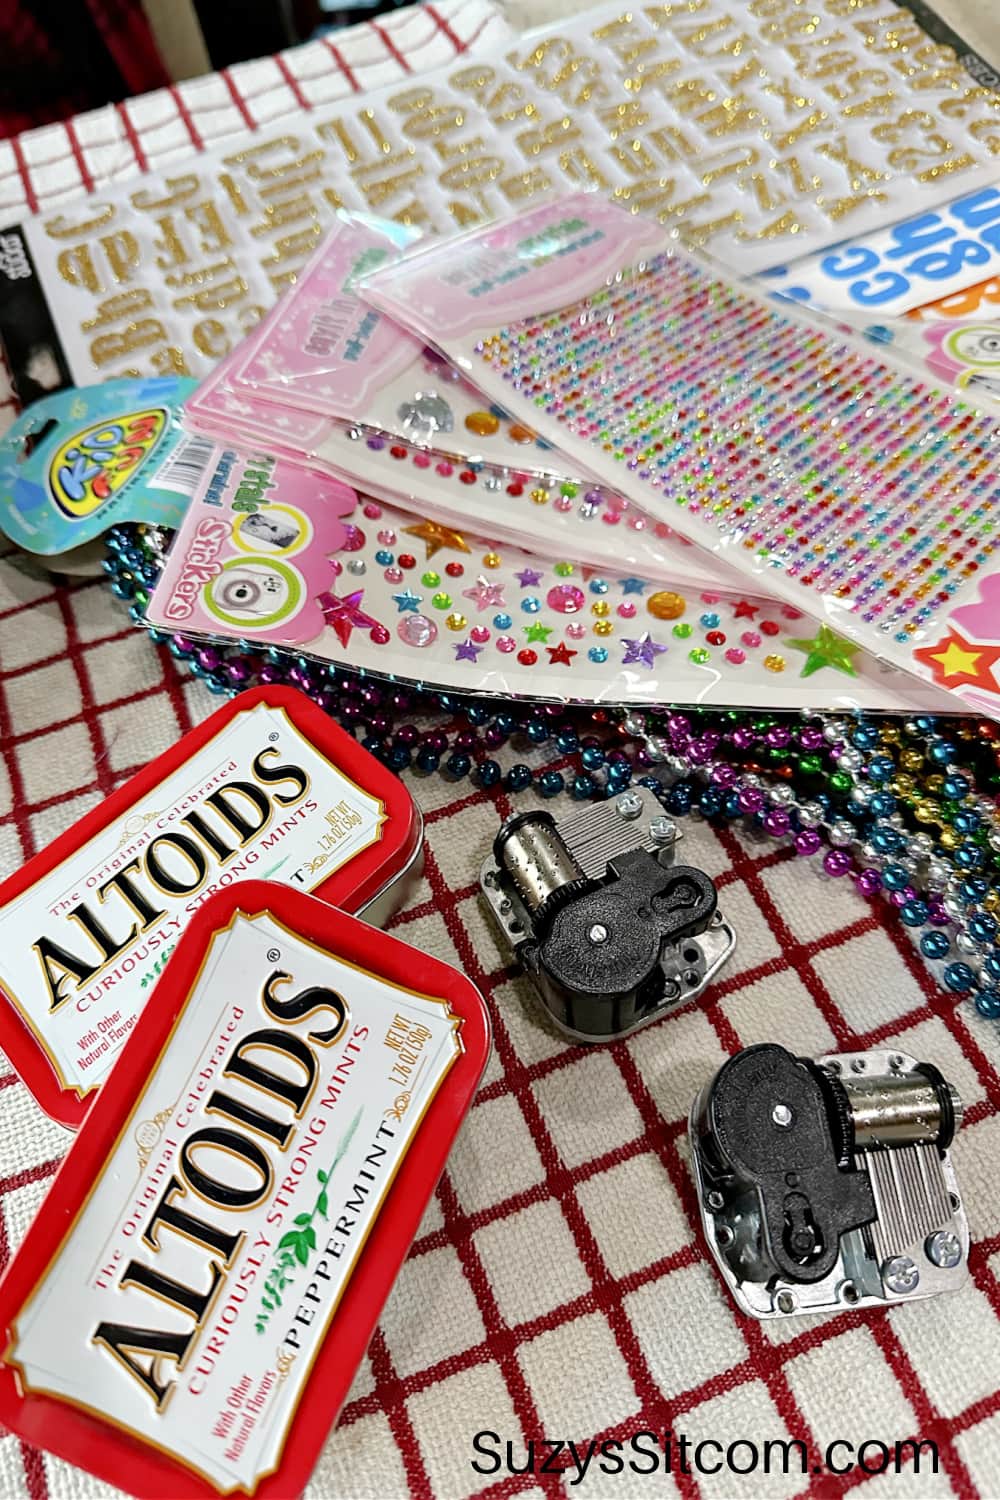 Supplies need to make music boxes with Altoid tins.